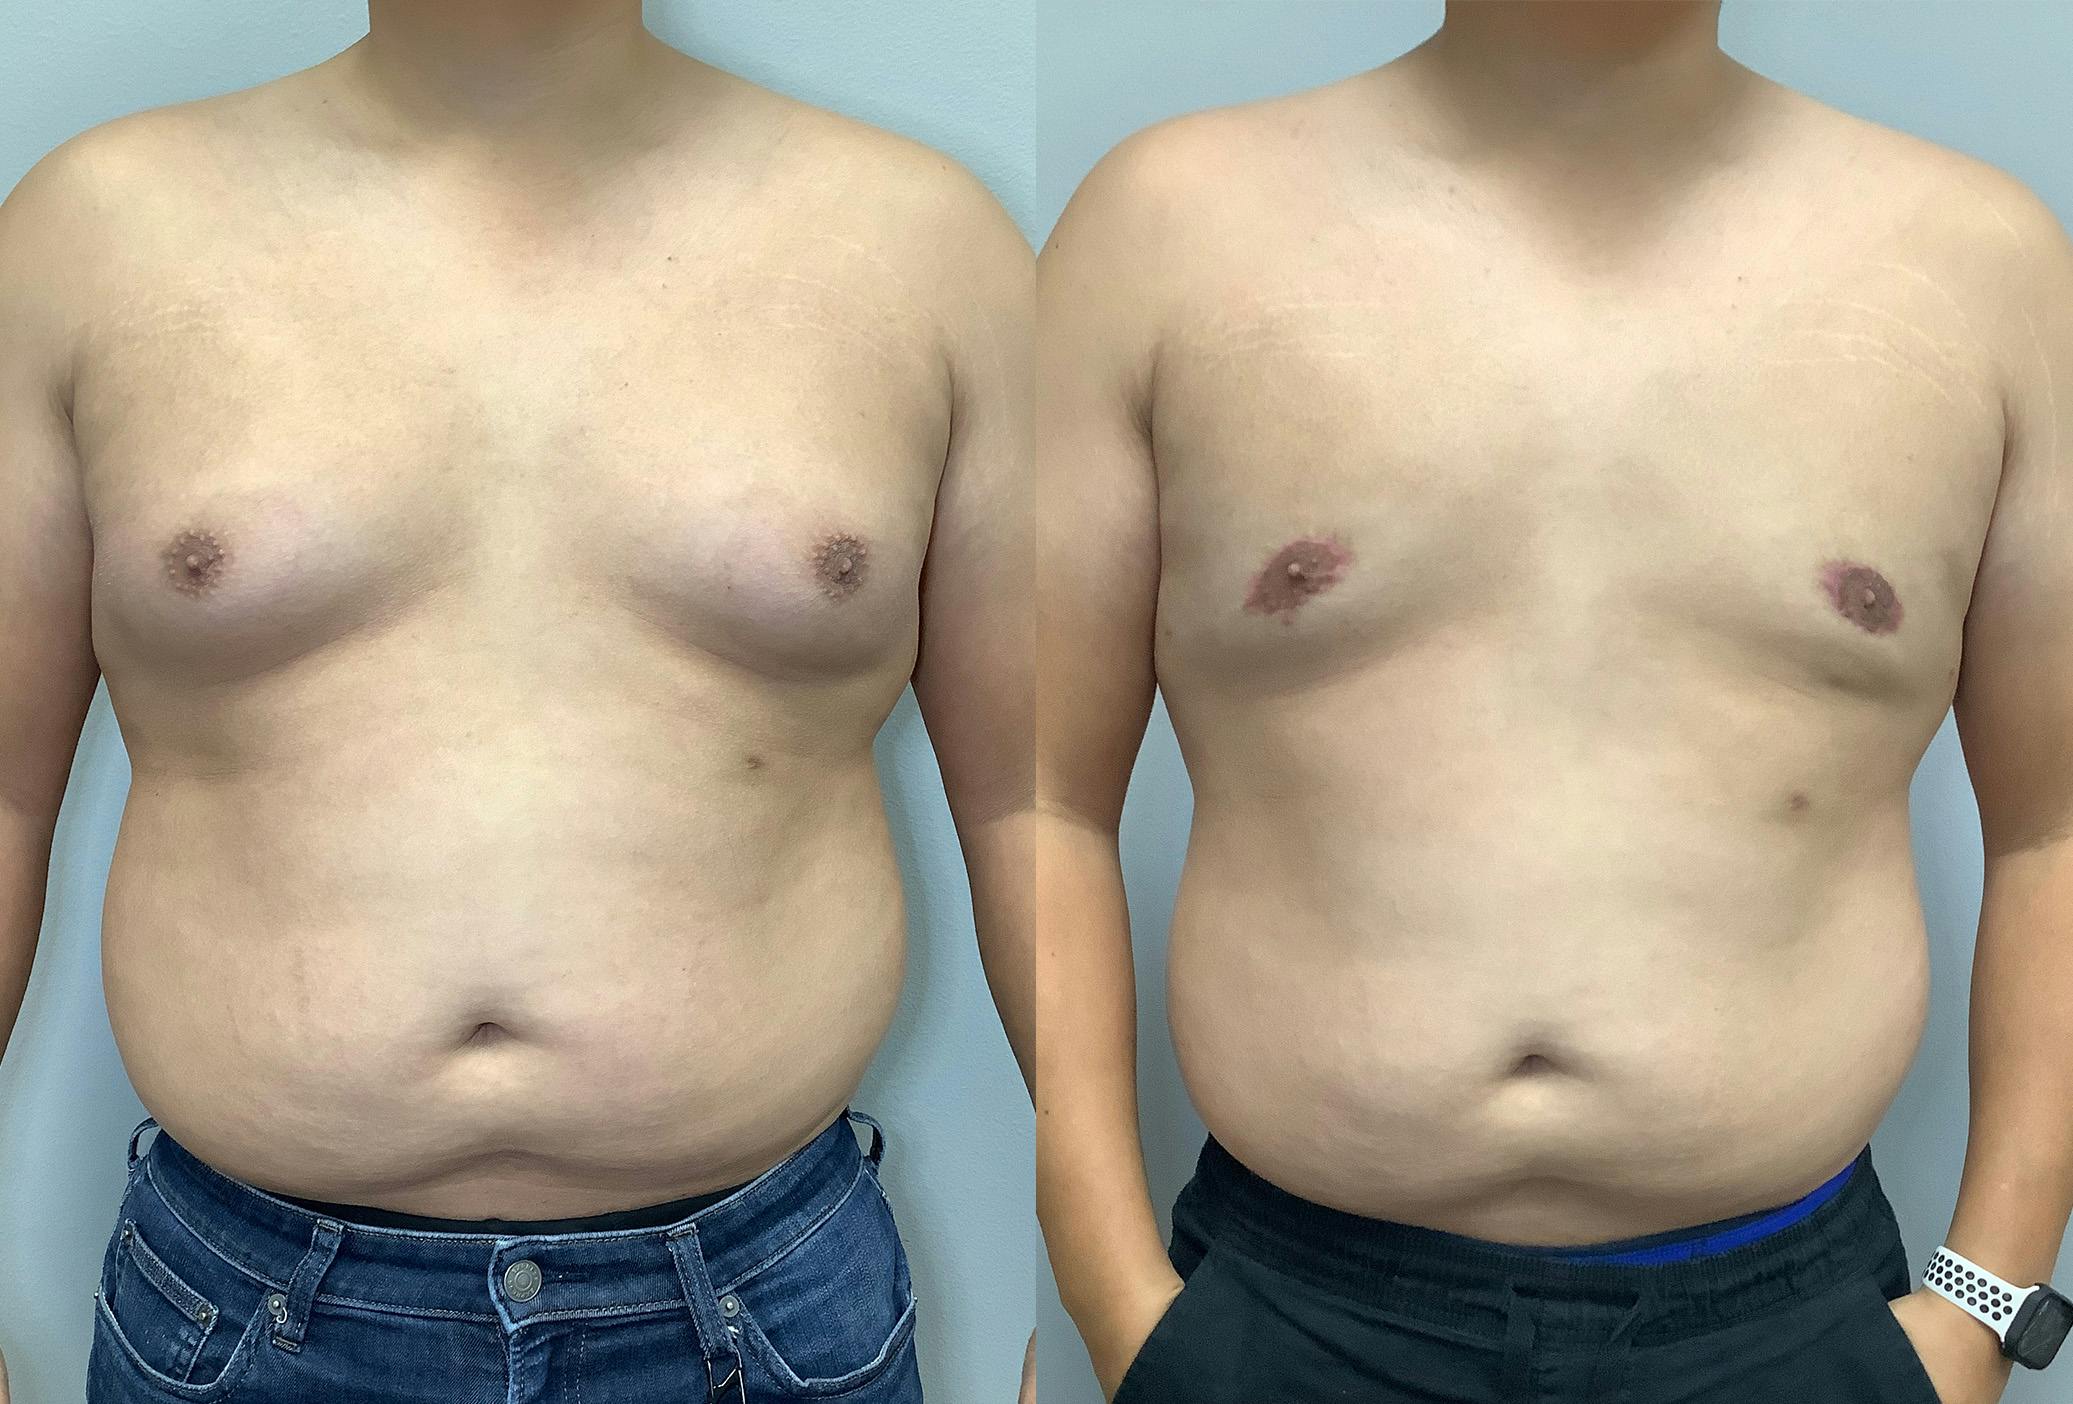 Before and After Male Breast Reduction in Houston - 01